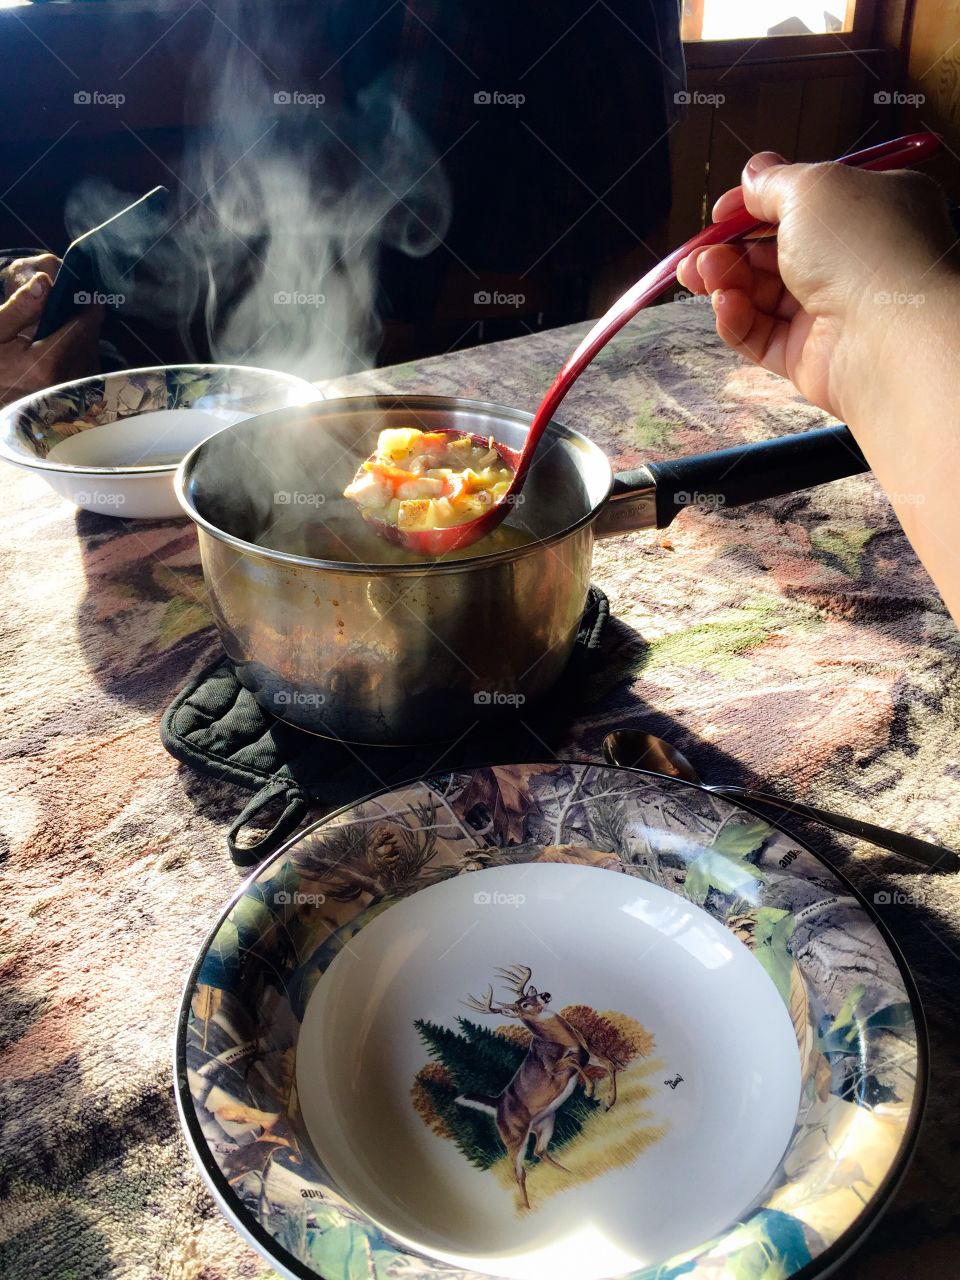 Homemade soup for those long workdays outside. Come in and warm up, soups on! Camo tablecloth & dinnerware for Off Grid wilderness living. 